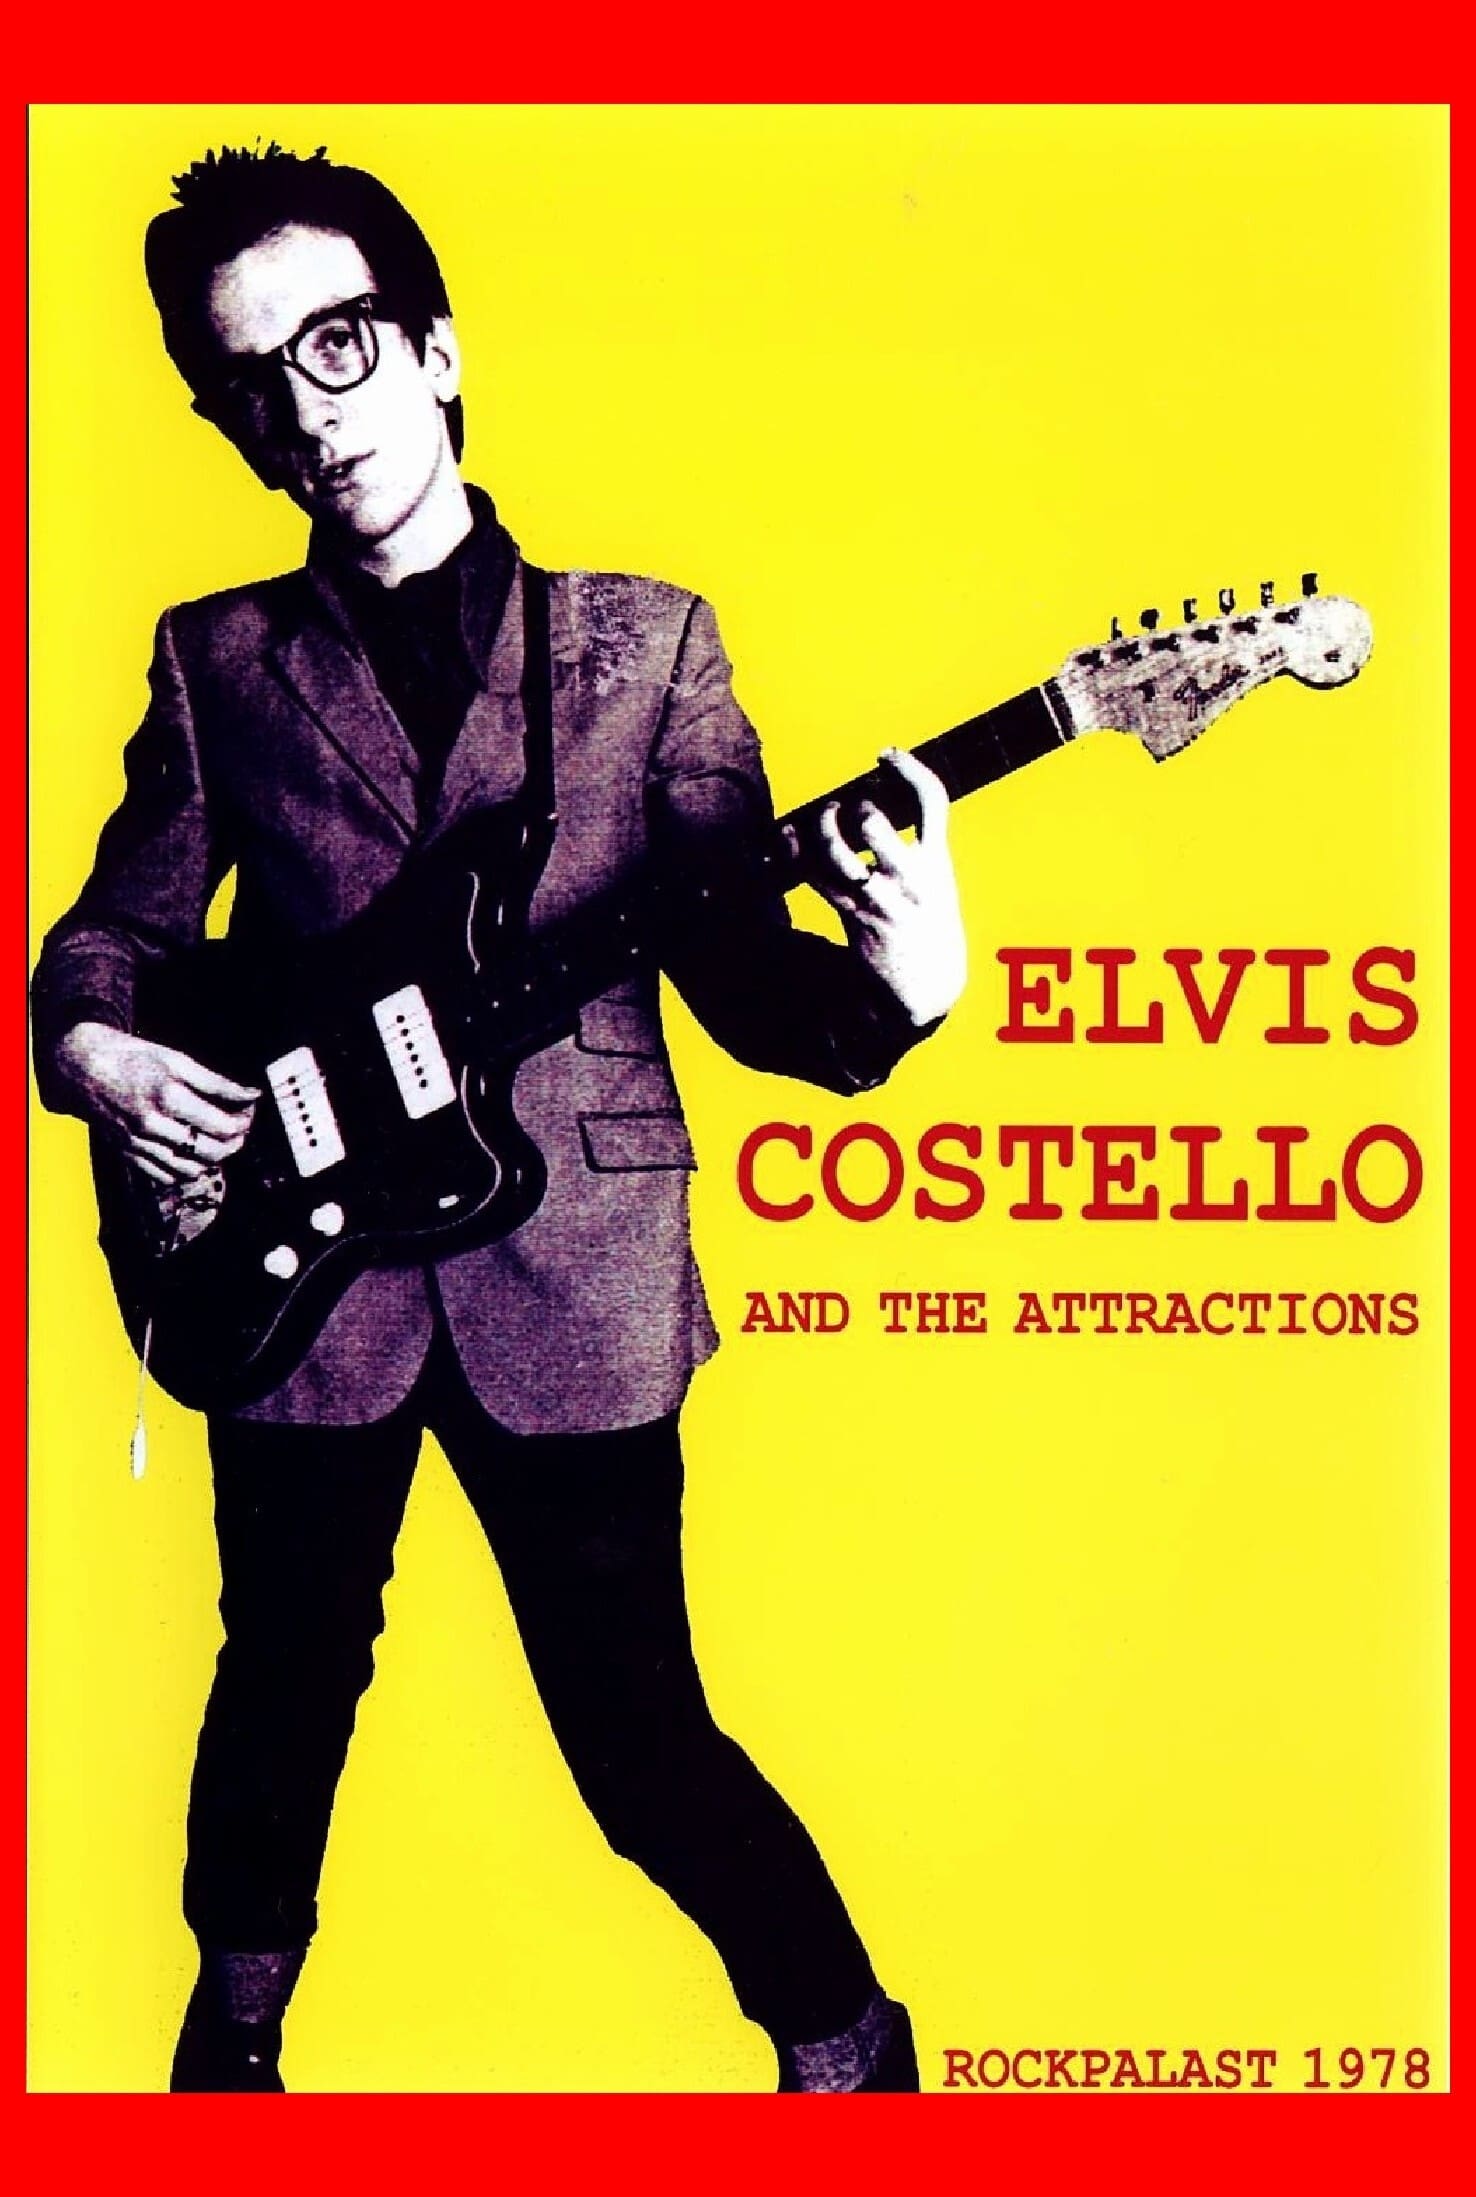 Elvis Costello and The Attractions: Live on Rockpalast